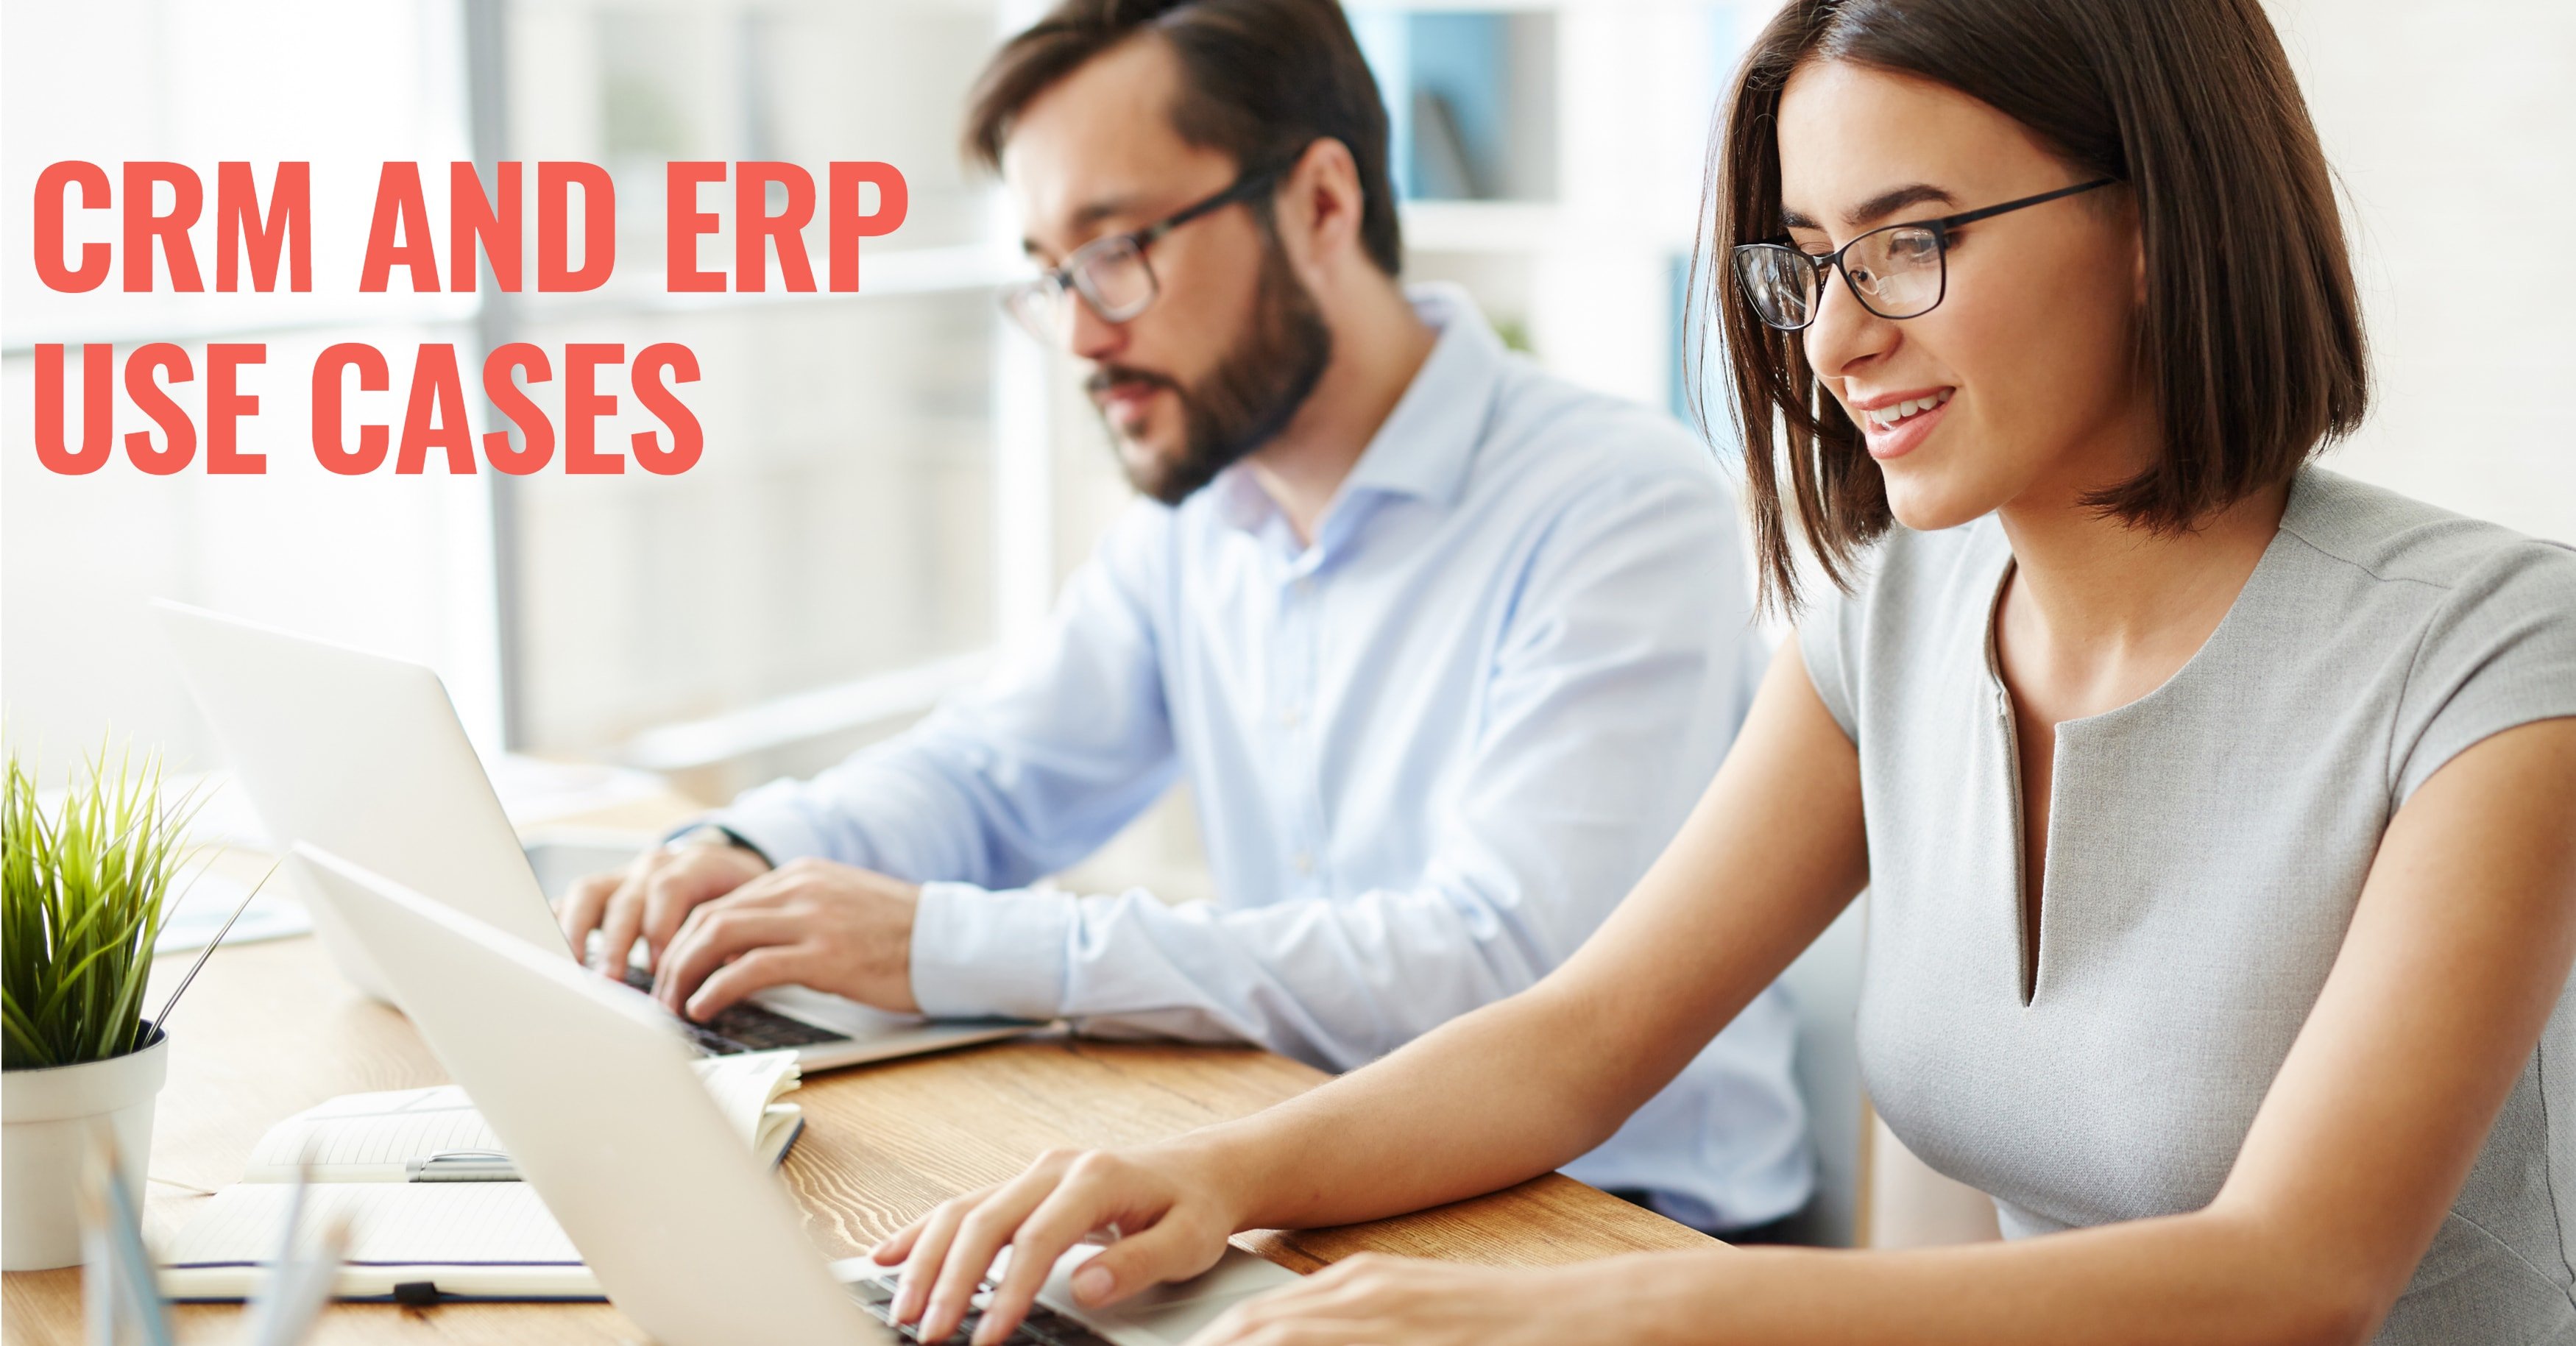 10 Reasons to Create CRM and ERP Use Cases